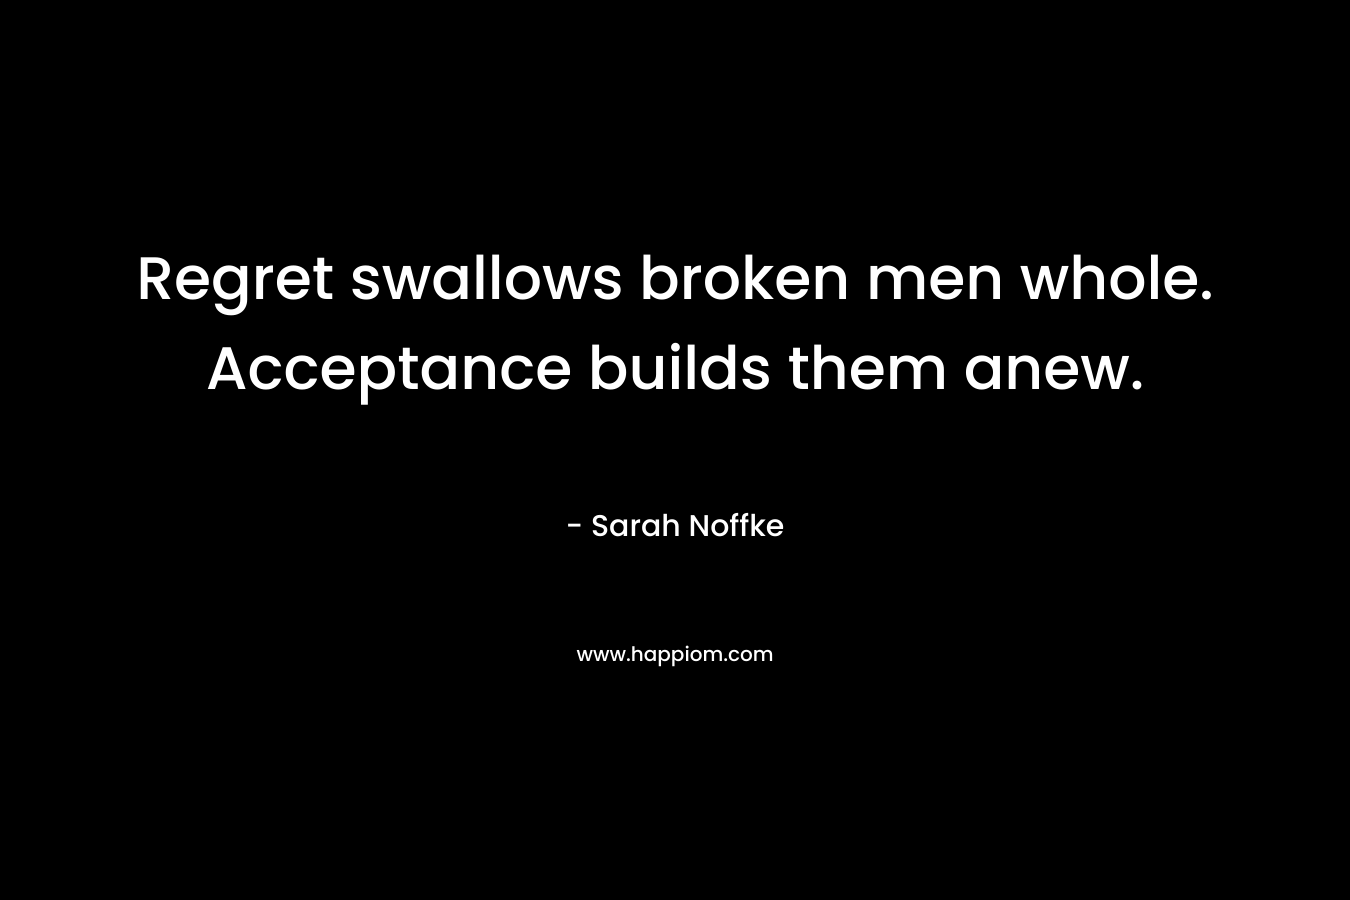 Regret swallows broken men whole. Acceptance builds them anew.